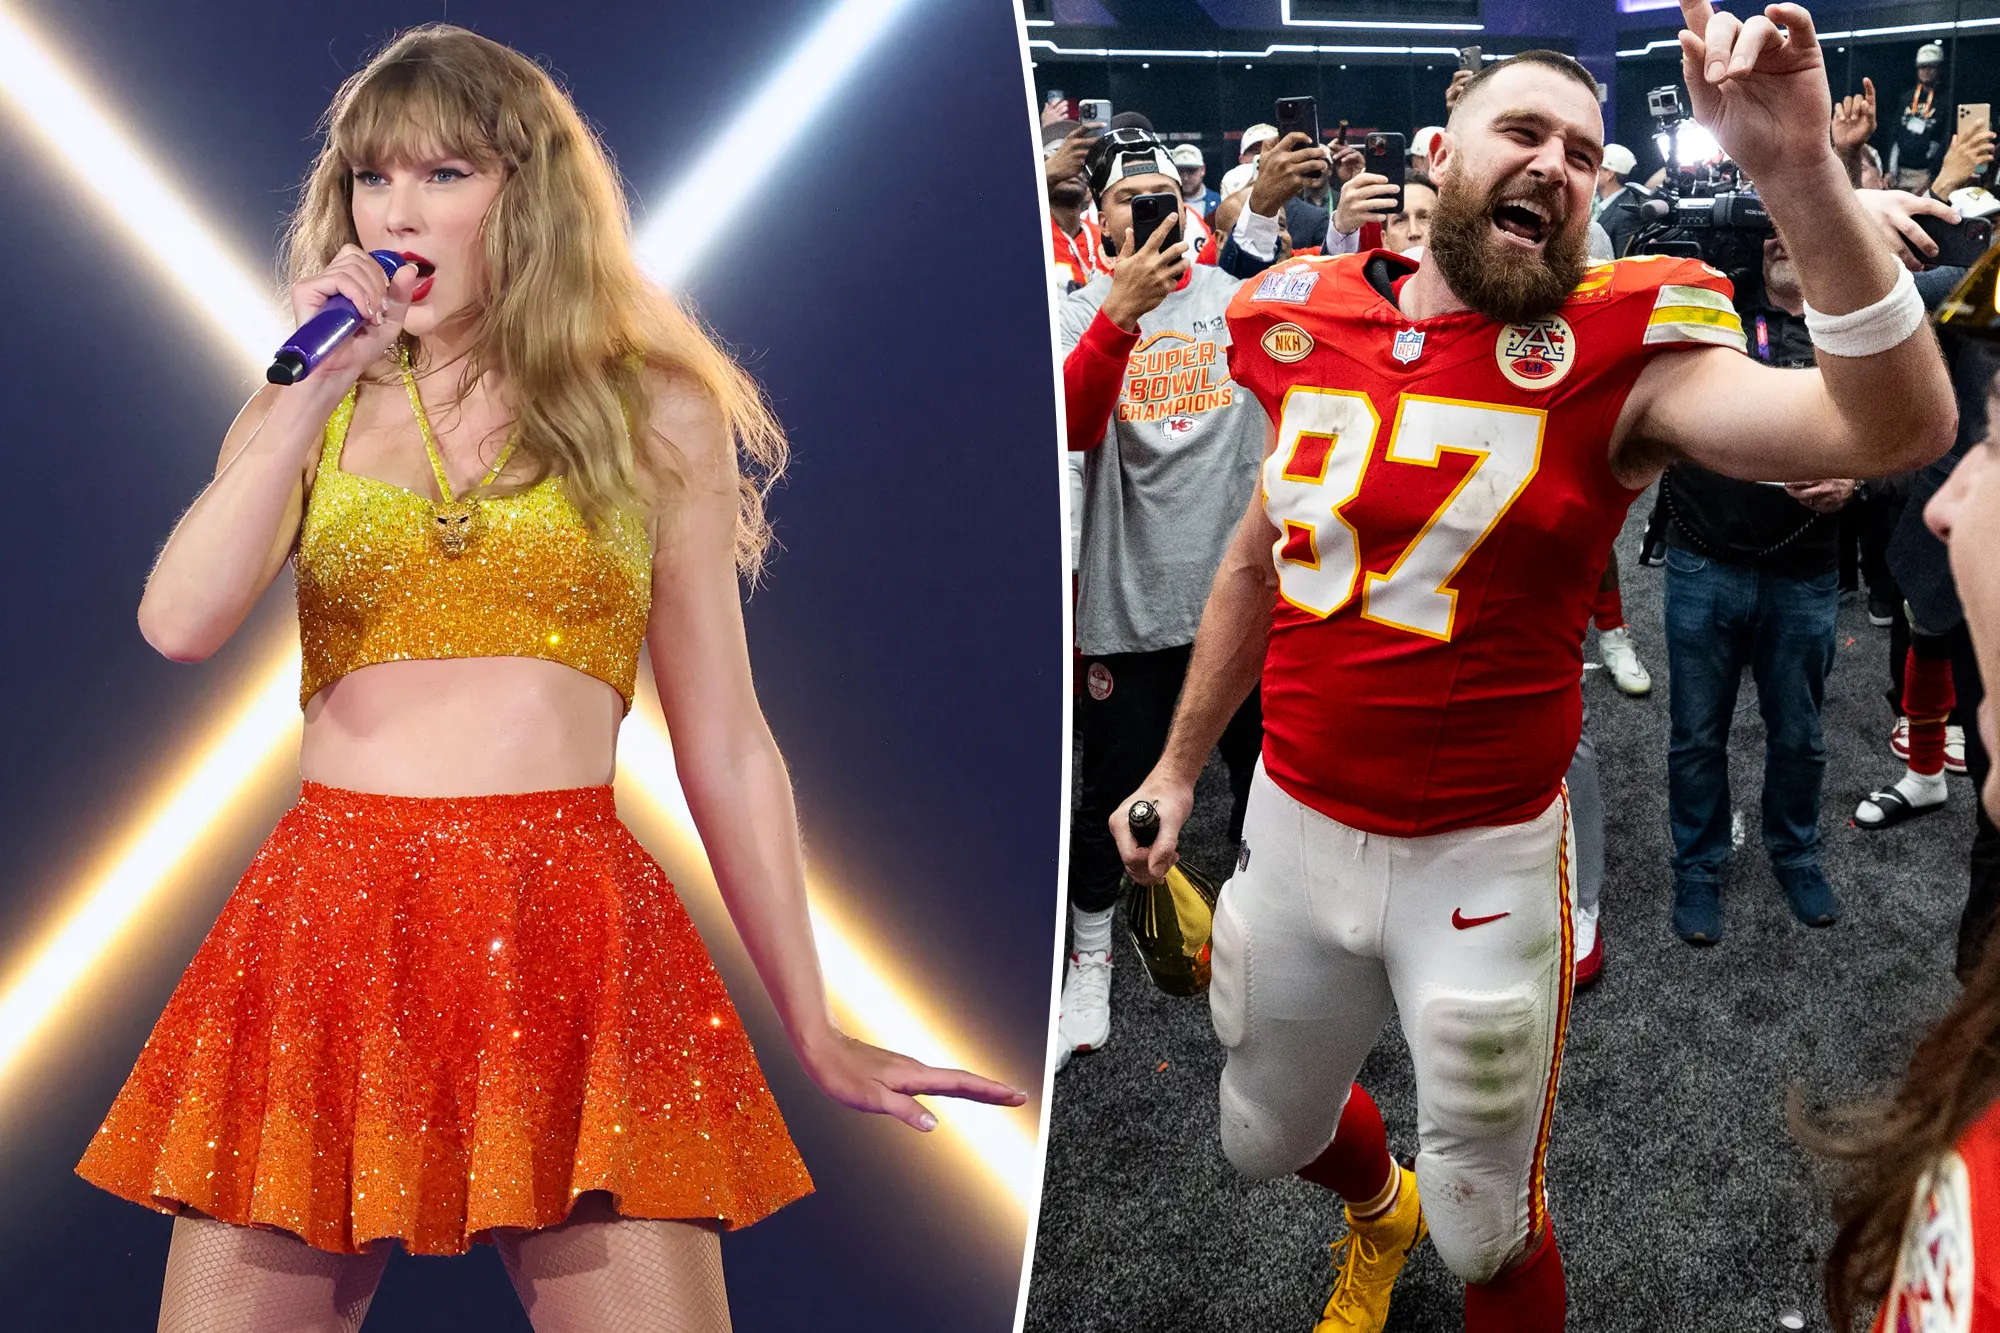 Despite starting a brand new leg of The Eras Tour, Taylor Swift is still making room for subtle, romantic references to her boyfriend, Travis Kelce: The pop star closed her Paris run of The Eras Tour by wearing a stage outfit with the Kansas City Chiefs's red and gold colors.